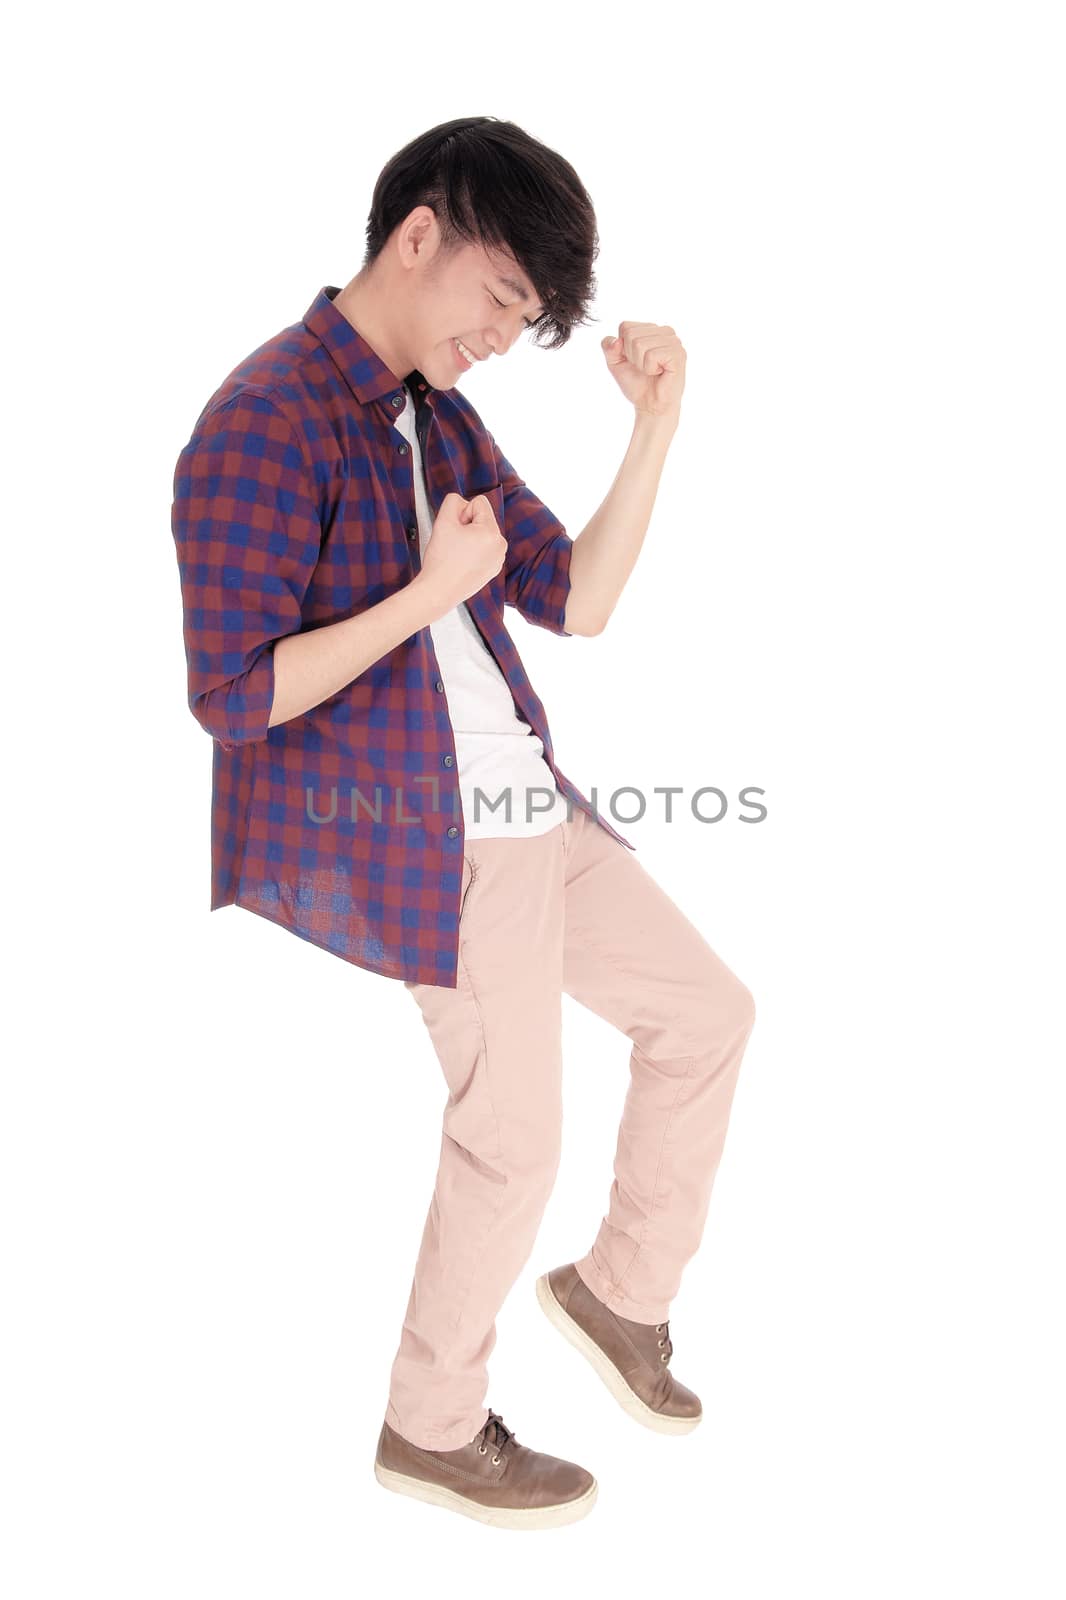 An young Asian man in a checkered shirt and sneakers dancing on his
toe, isolated for white background.
